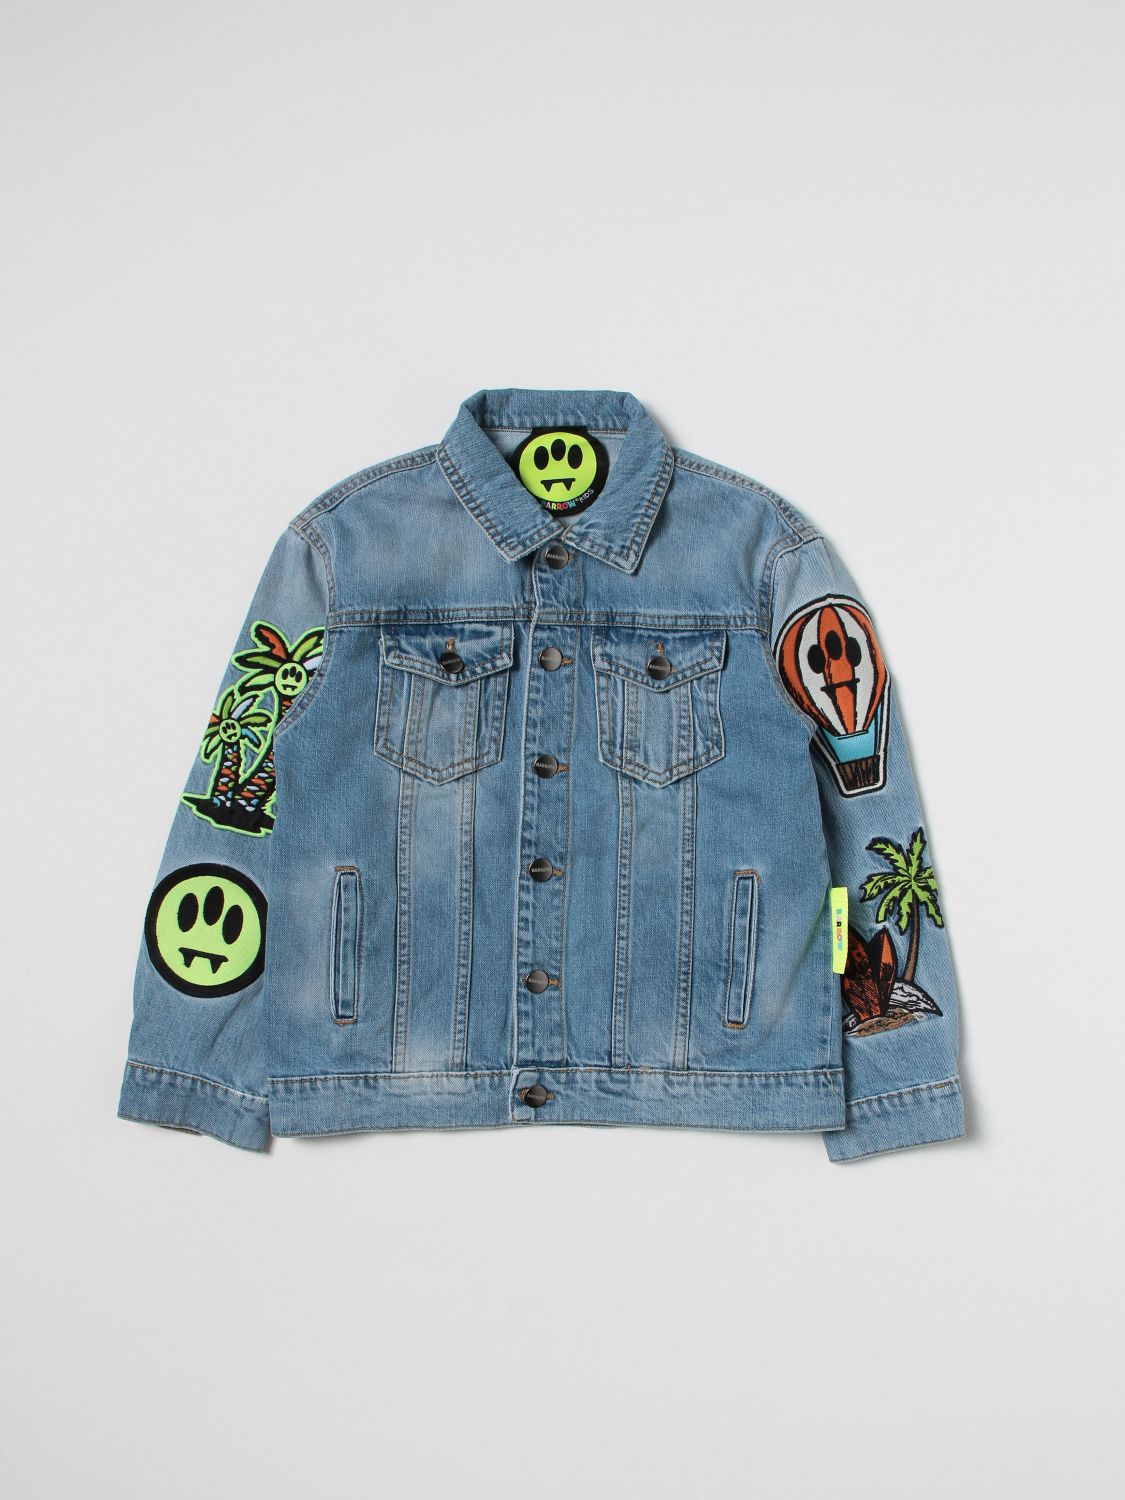 Barrow Light Blue Jacket For Kids With Iconic Smiley And Patch